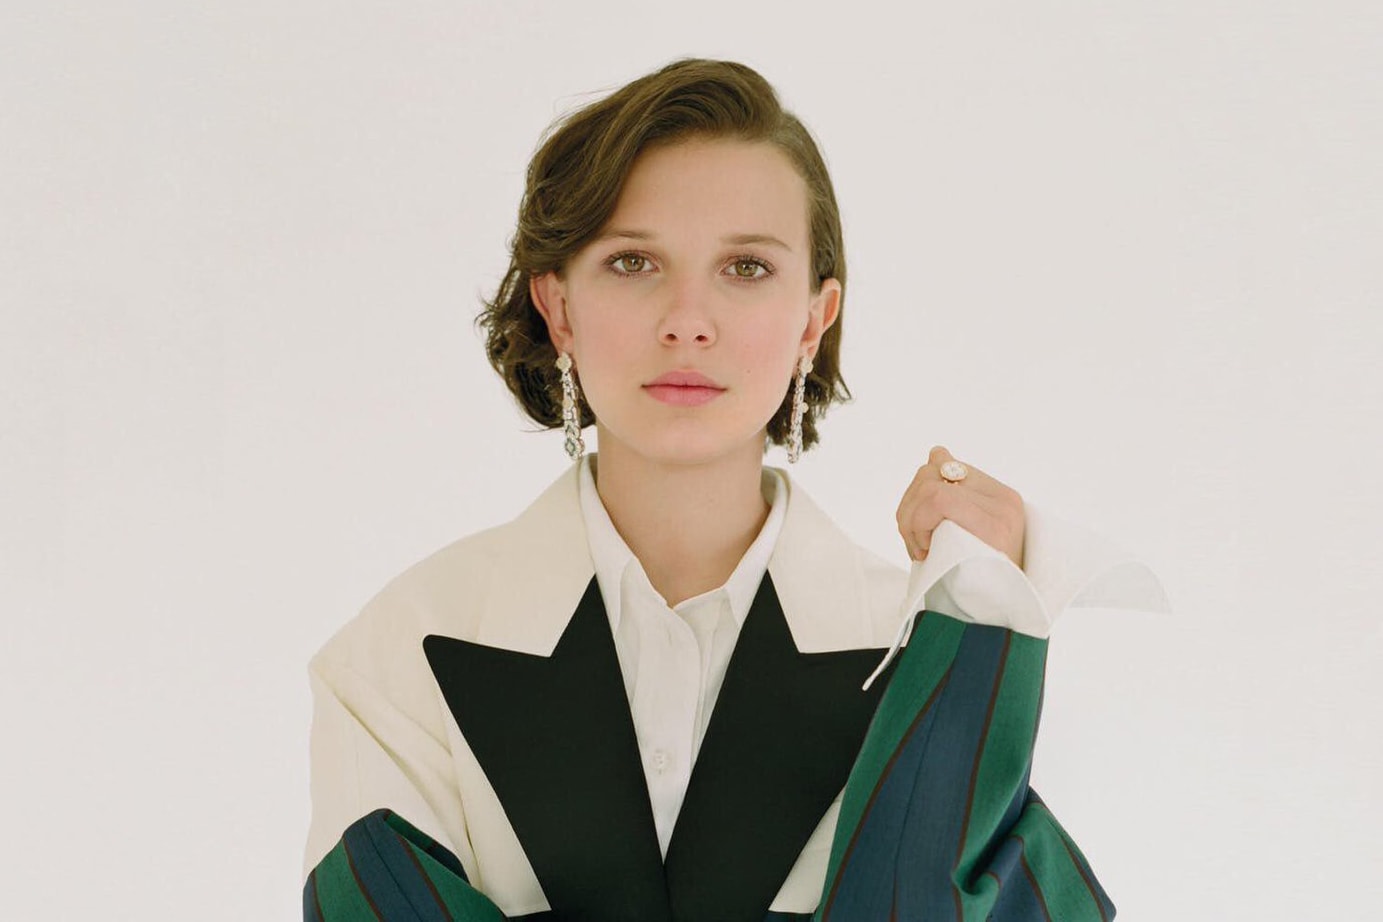 Millie Bobby Brown Sherlock Holmes Enola Holmes Series TV Movies Detective Mystery Acting Directing Debut